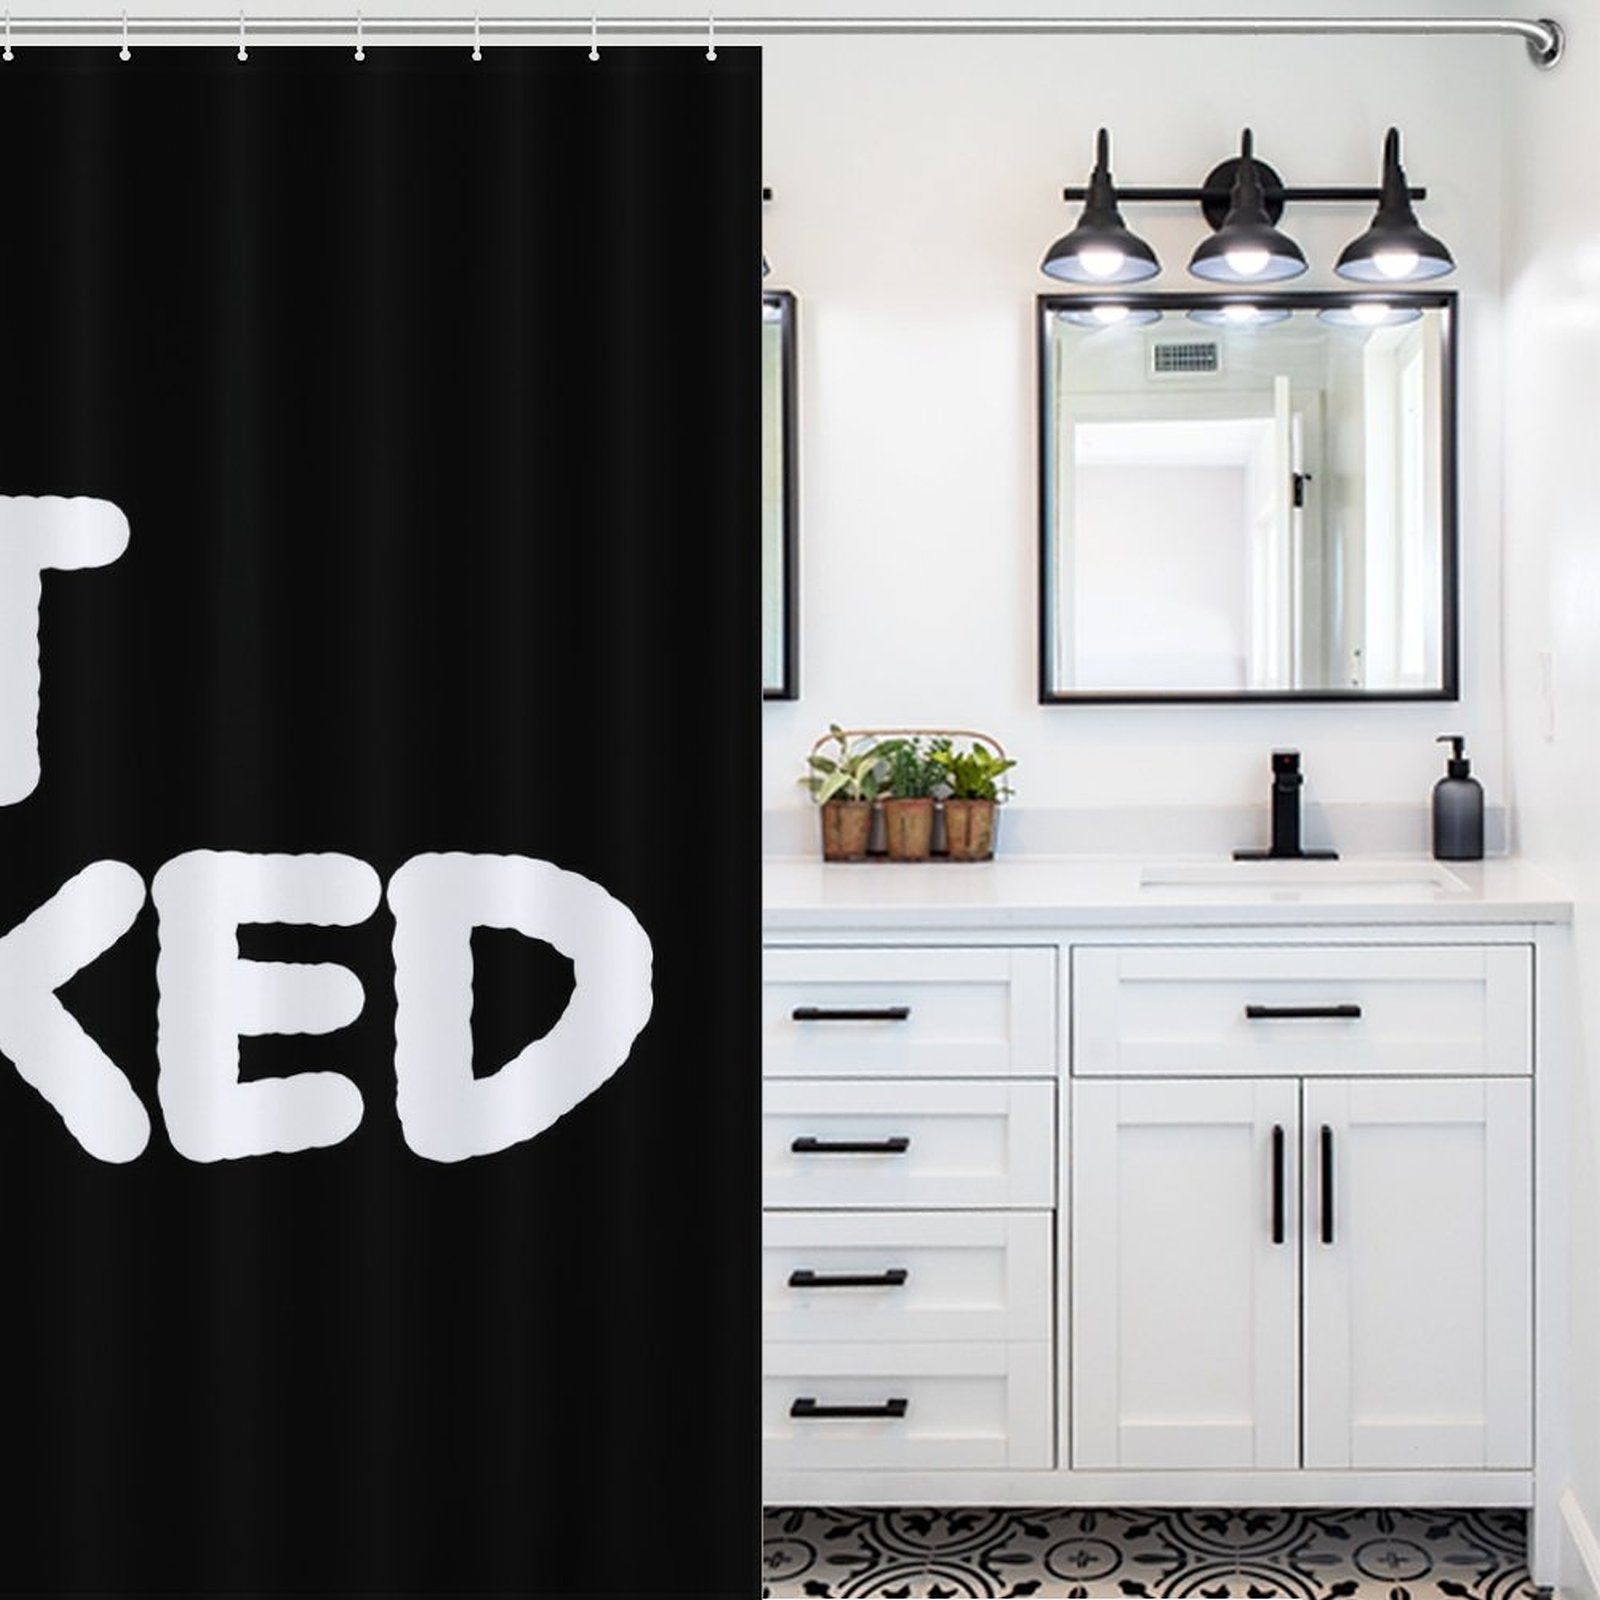 A bathroom with a Cotton Cat Funny Black and White Letters Get Naked Shower Curtain-Cottoncat, a white vanity with drawers, double sinks, and mirrors with sconce lighting. The floor has a striking black and white pattern.